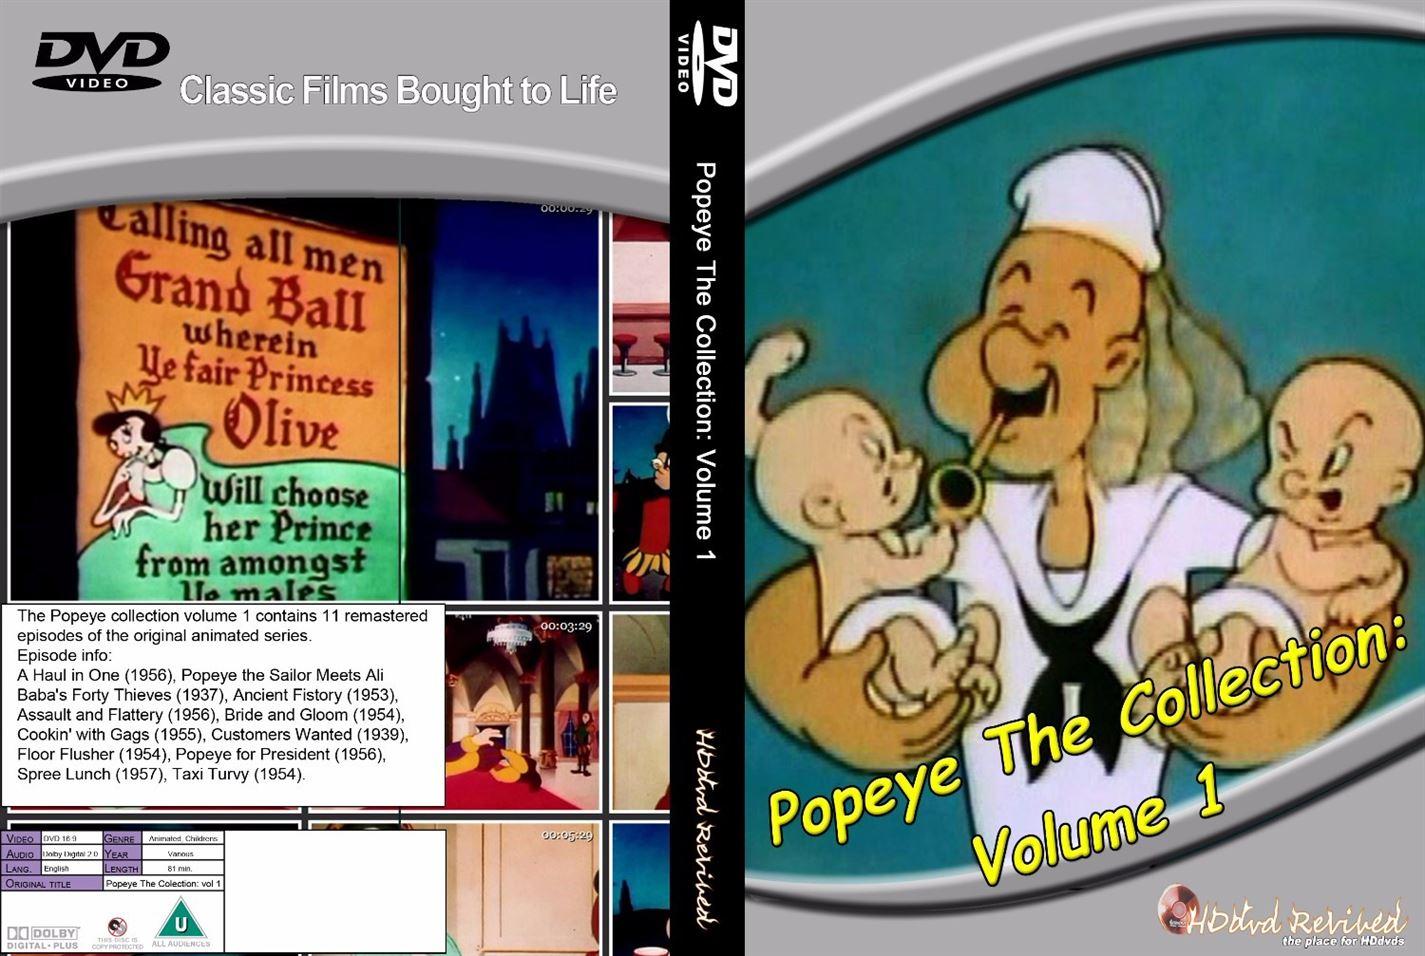 Popeye The Collection: Volume 1 (1960) - DVD - (HDDVD-Revived) - NEW